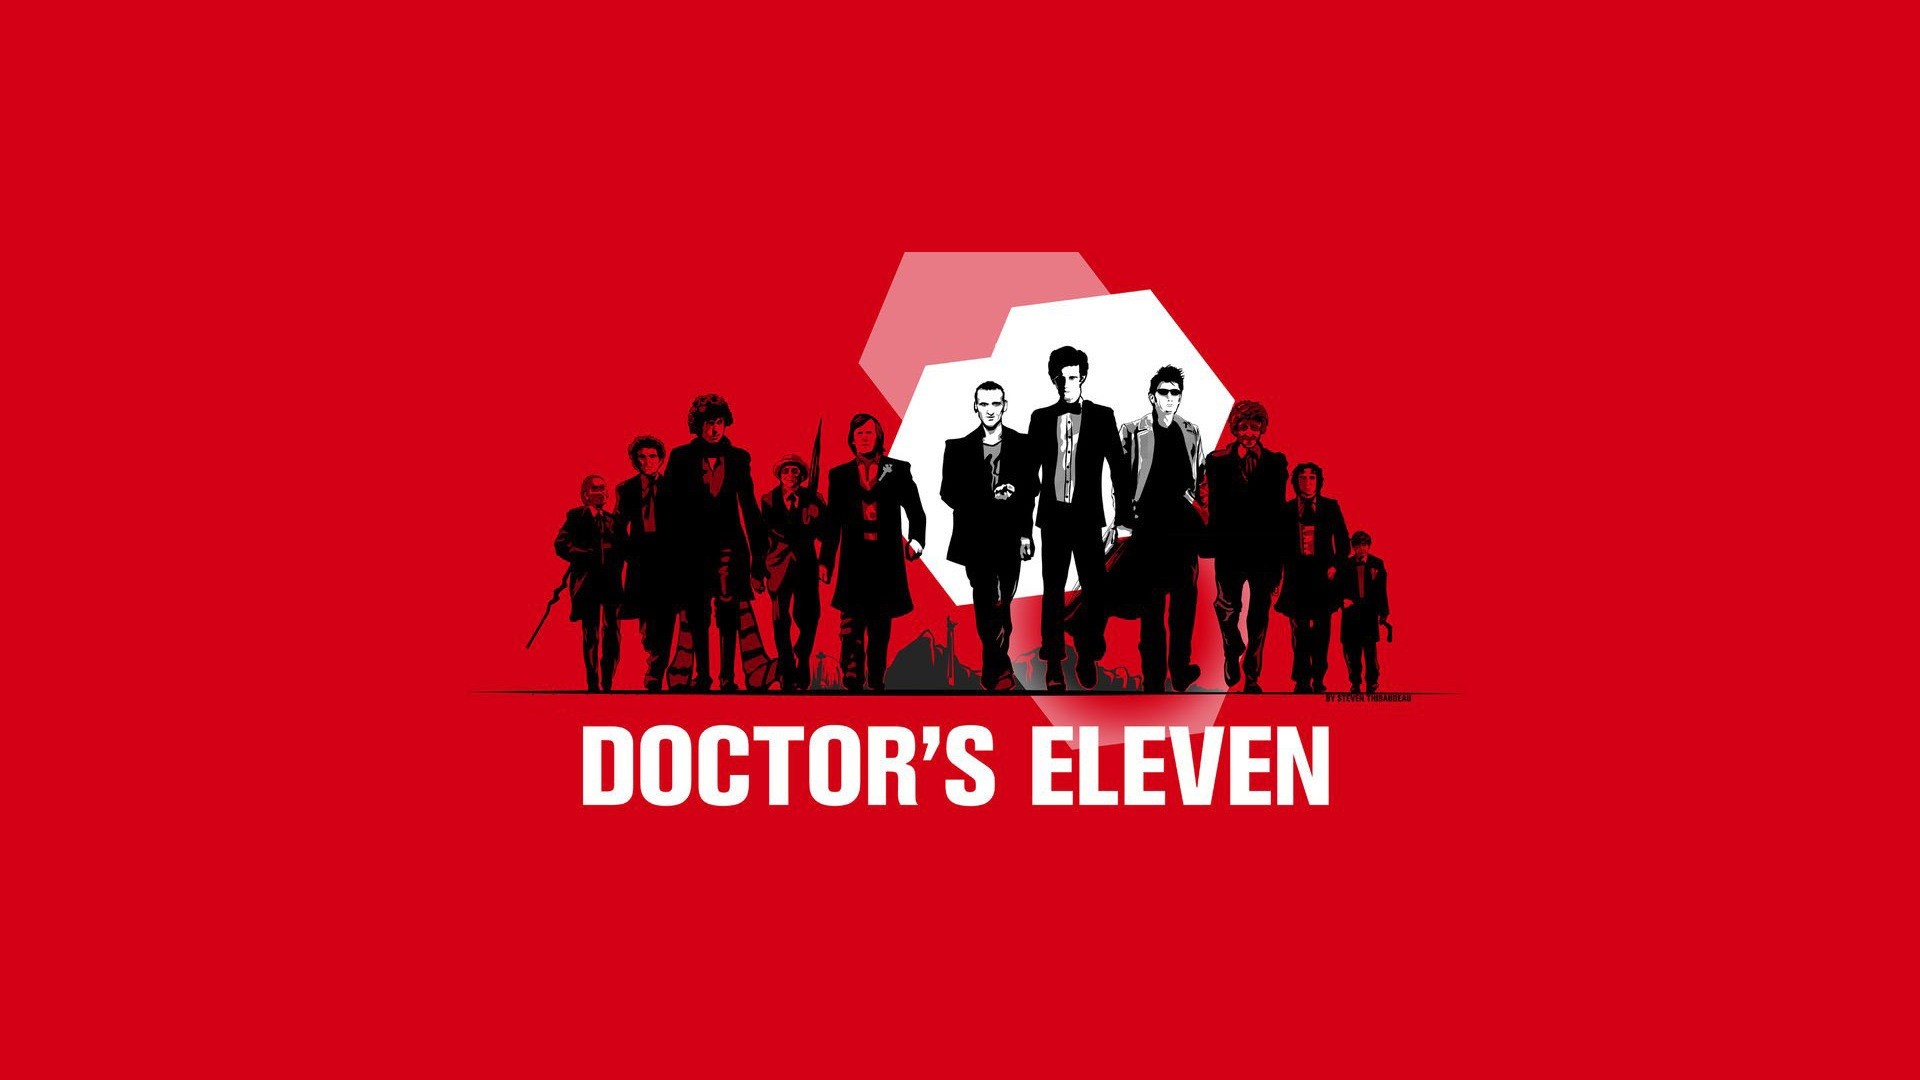 Doctor Who, The Doctor, Christopher Eccleston, David Tennant, Matt Smith,  Tom Baker, Simple Background, Artwork, Red, Oceans Eleven, Crossover  Wallpapers HD / Desktop and Mobile Backgrounds